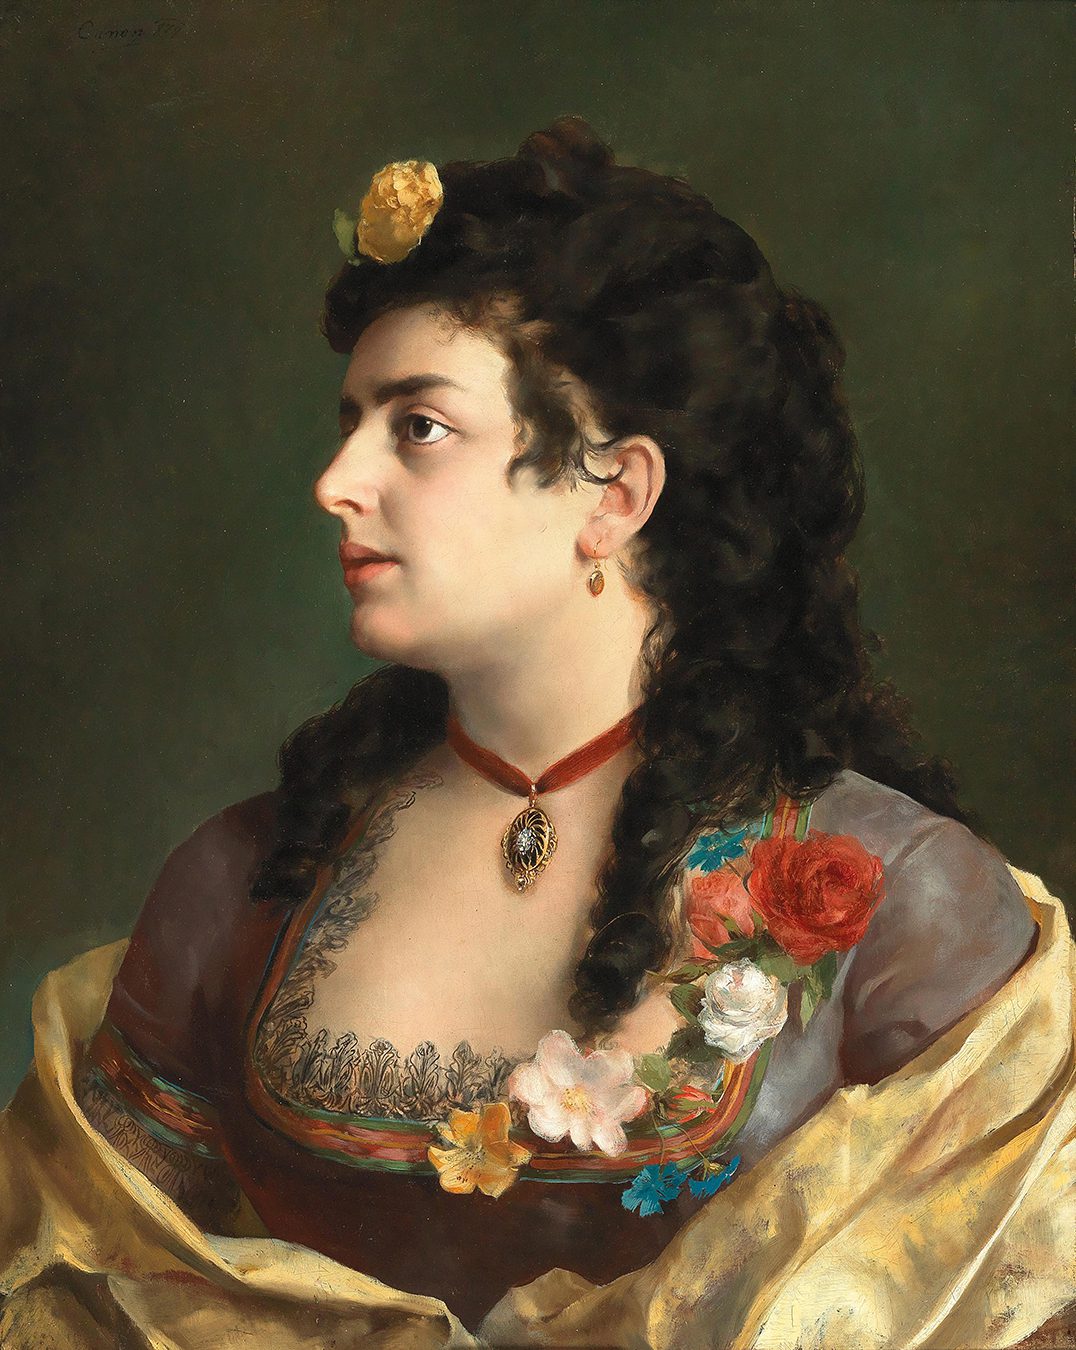 Portrait of a Lady with Yellow Shawl and Yellow Rose in her Hair by Canon from 1874